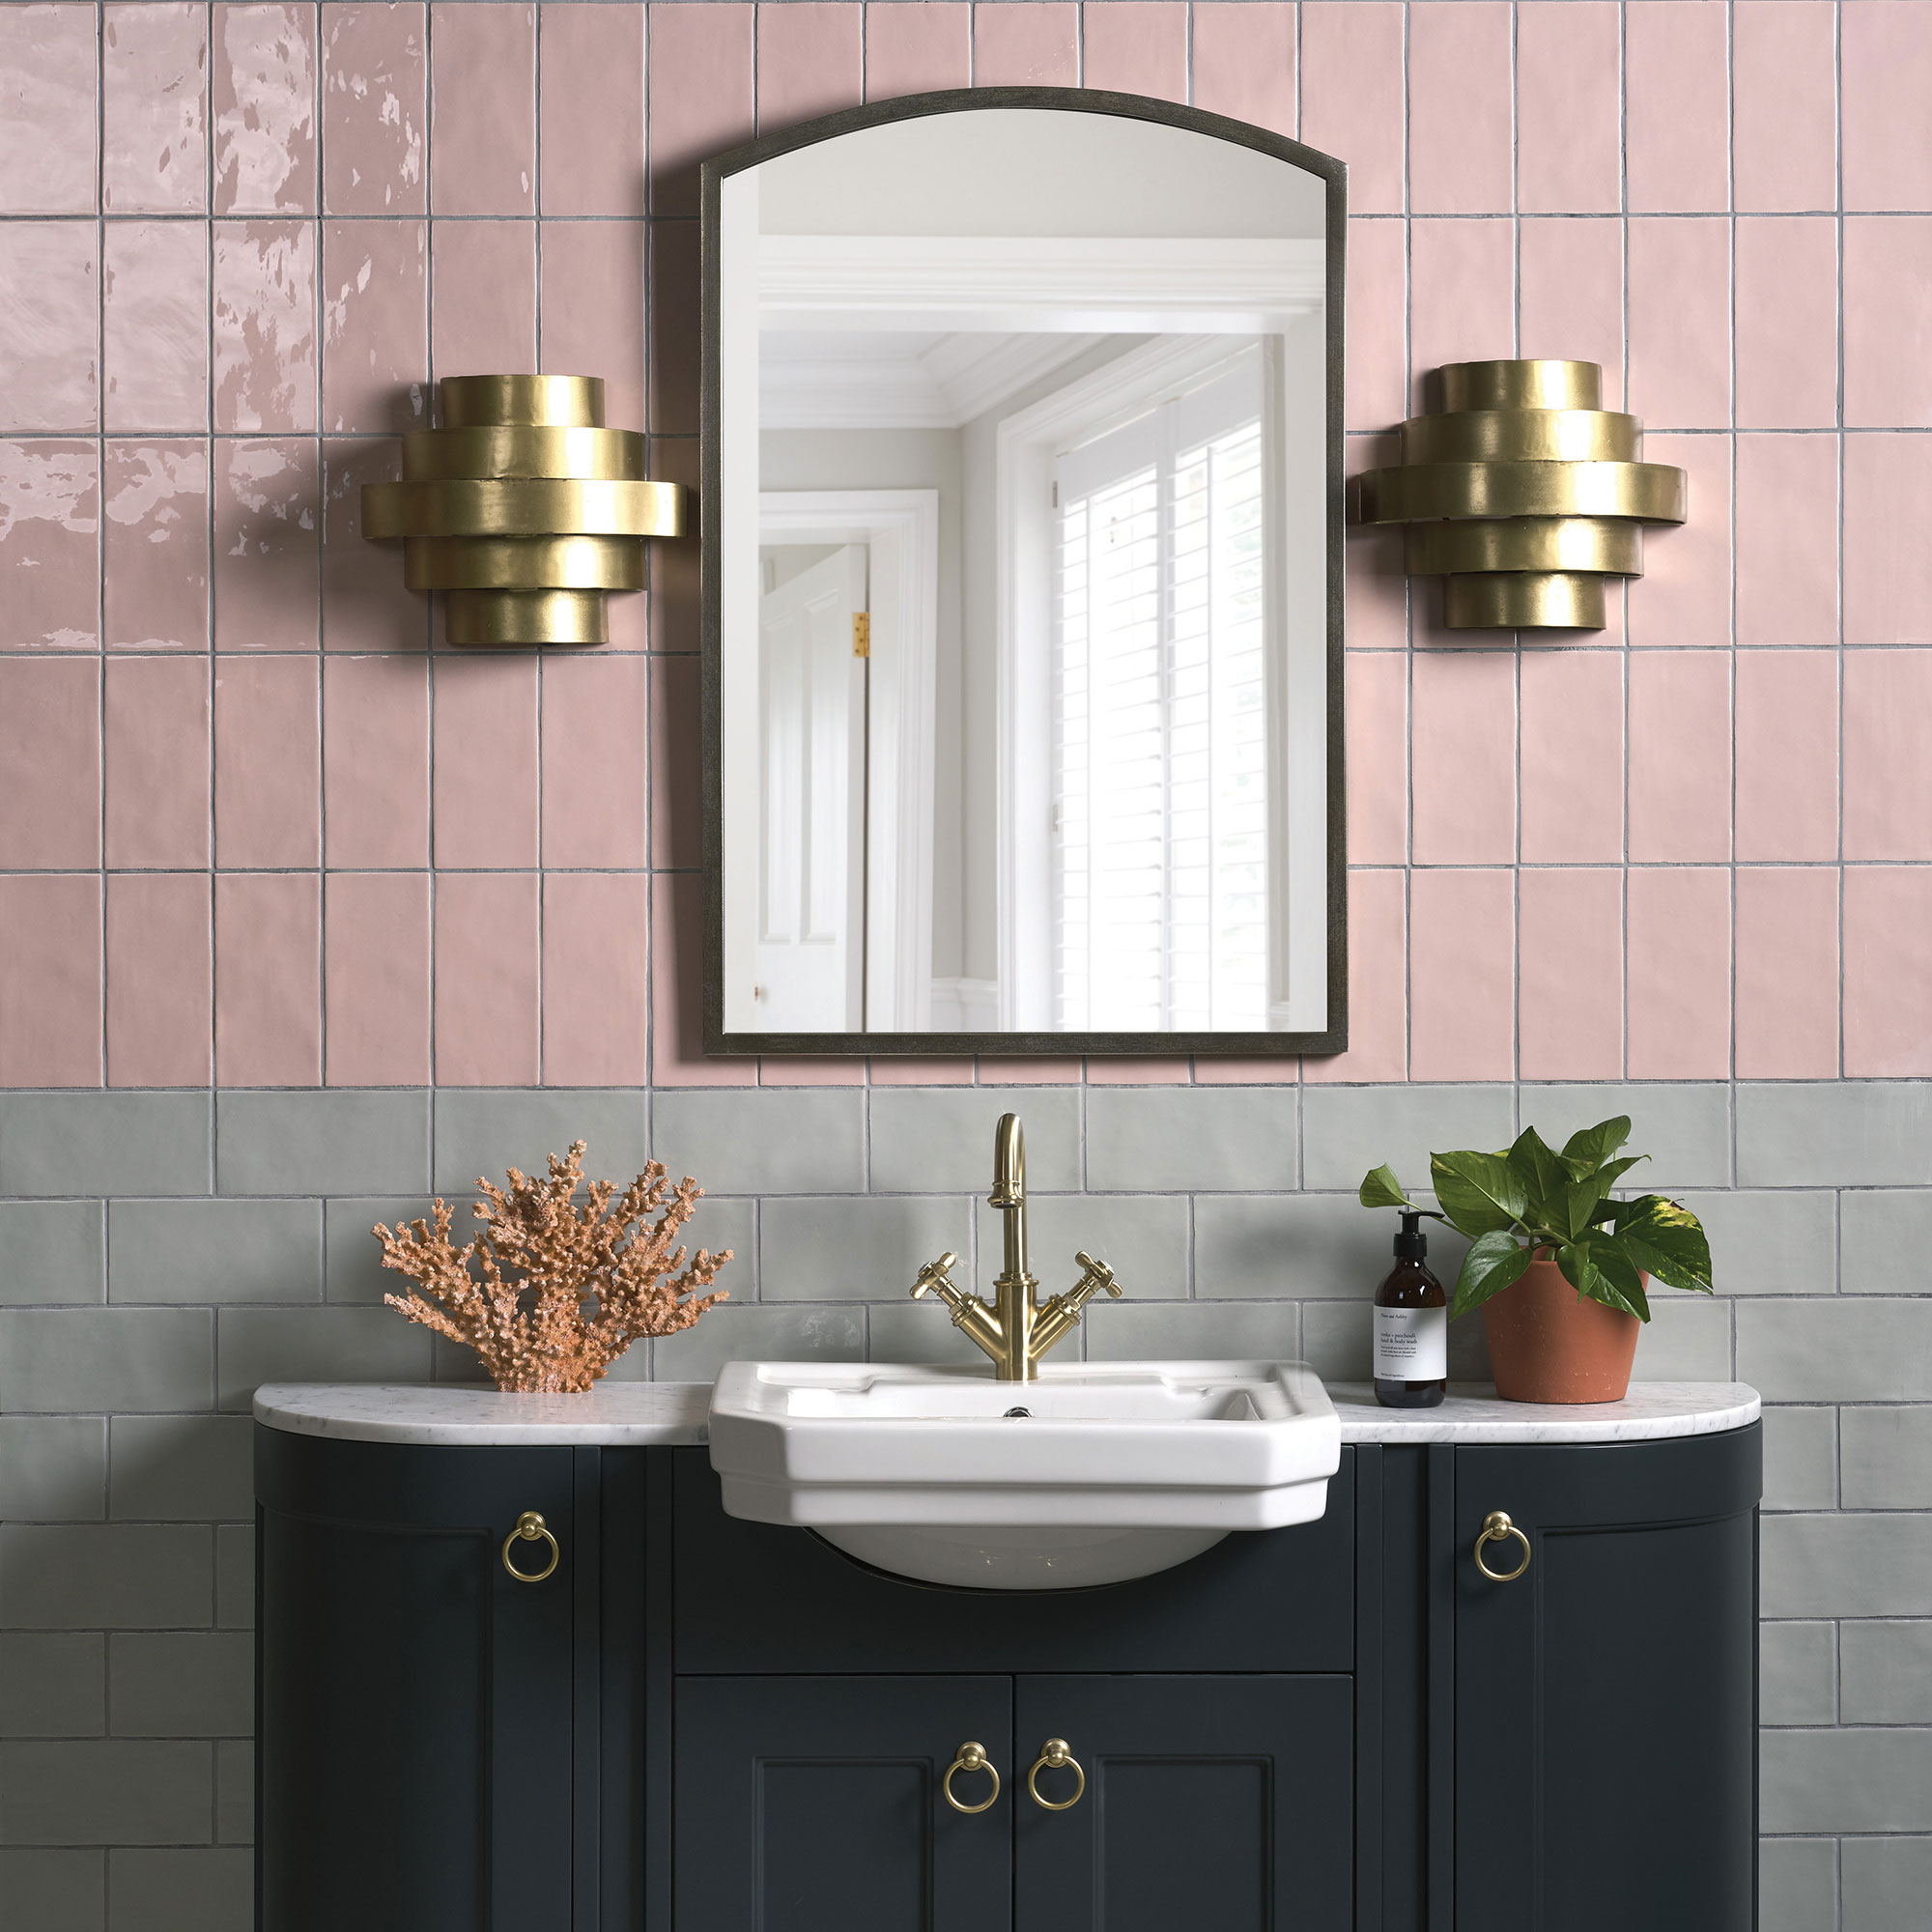 Bathroom with pink and grey wall tiled, vanity unit and mirror